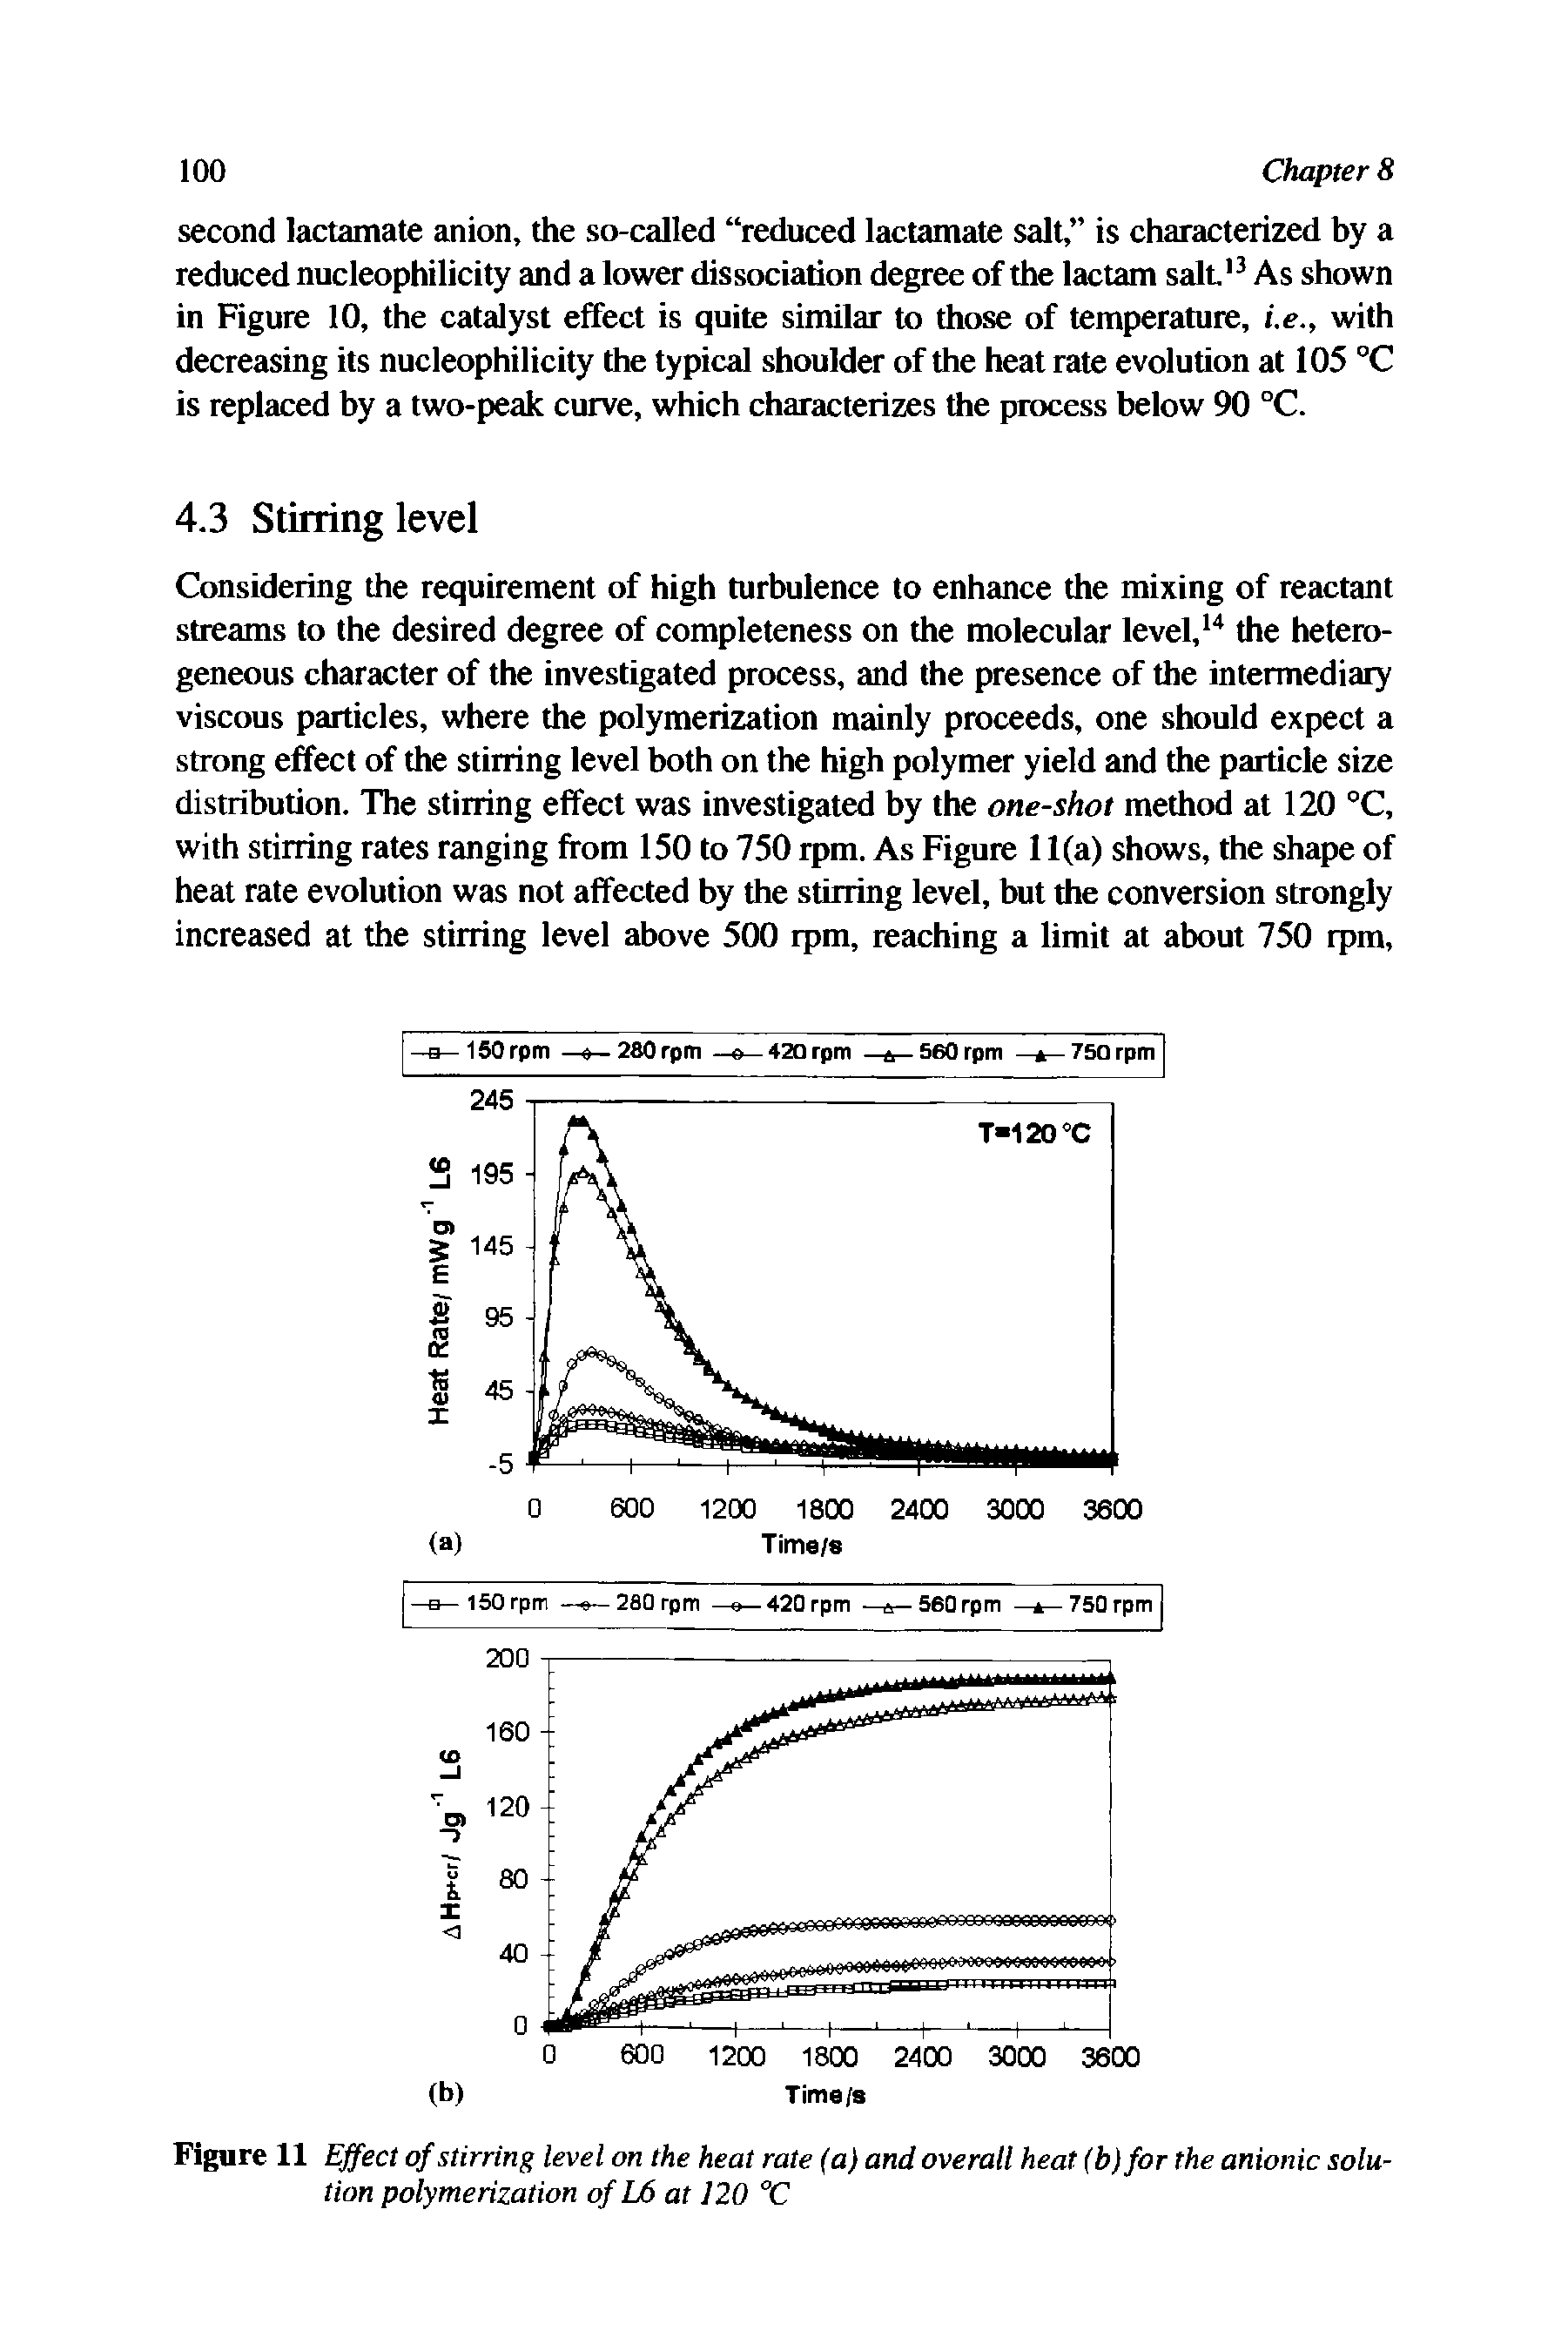 Figure 11 Effect of stirring level on the heat rate (a) and overall heat (b) for the anionic solution polymerization of L6 at 120 °C...